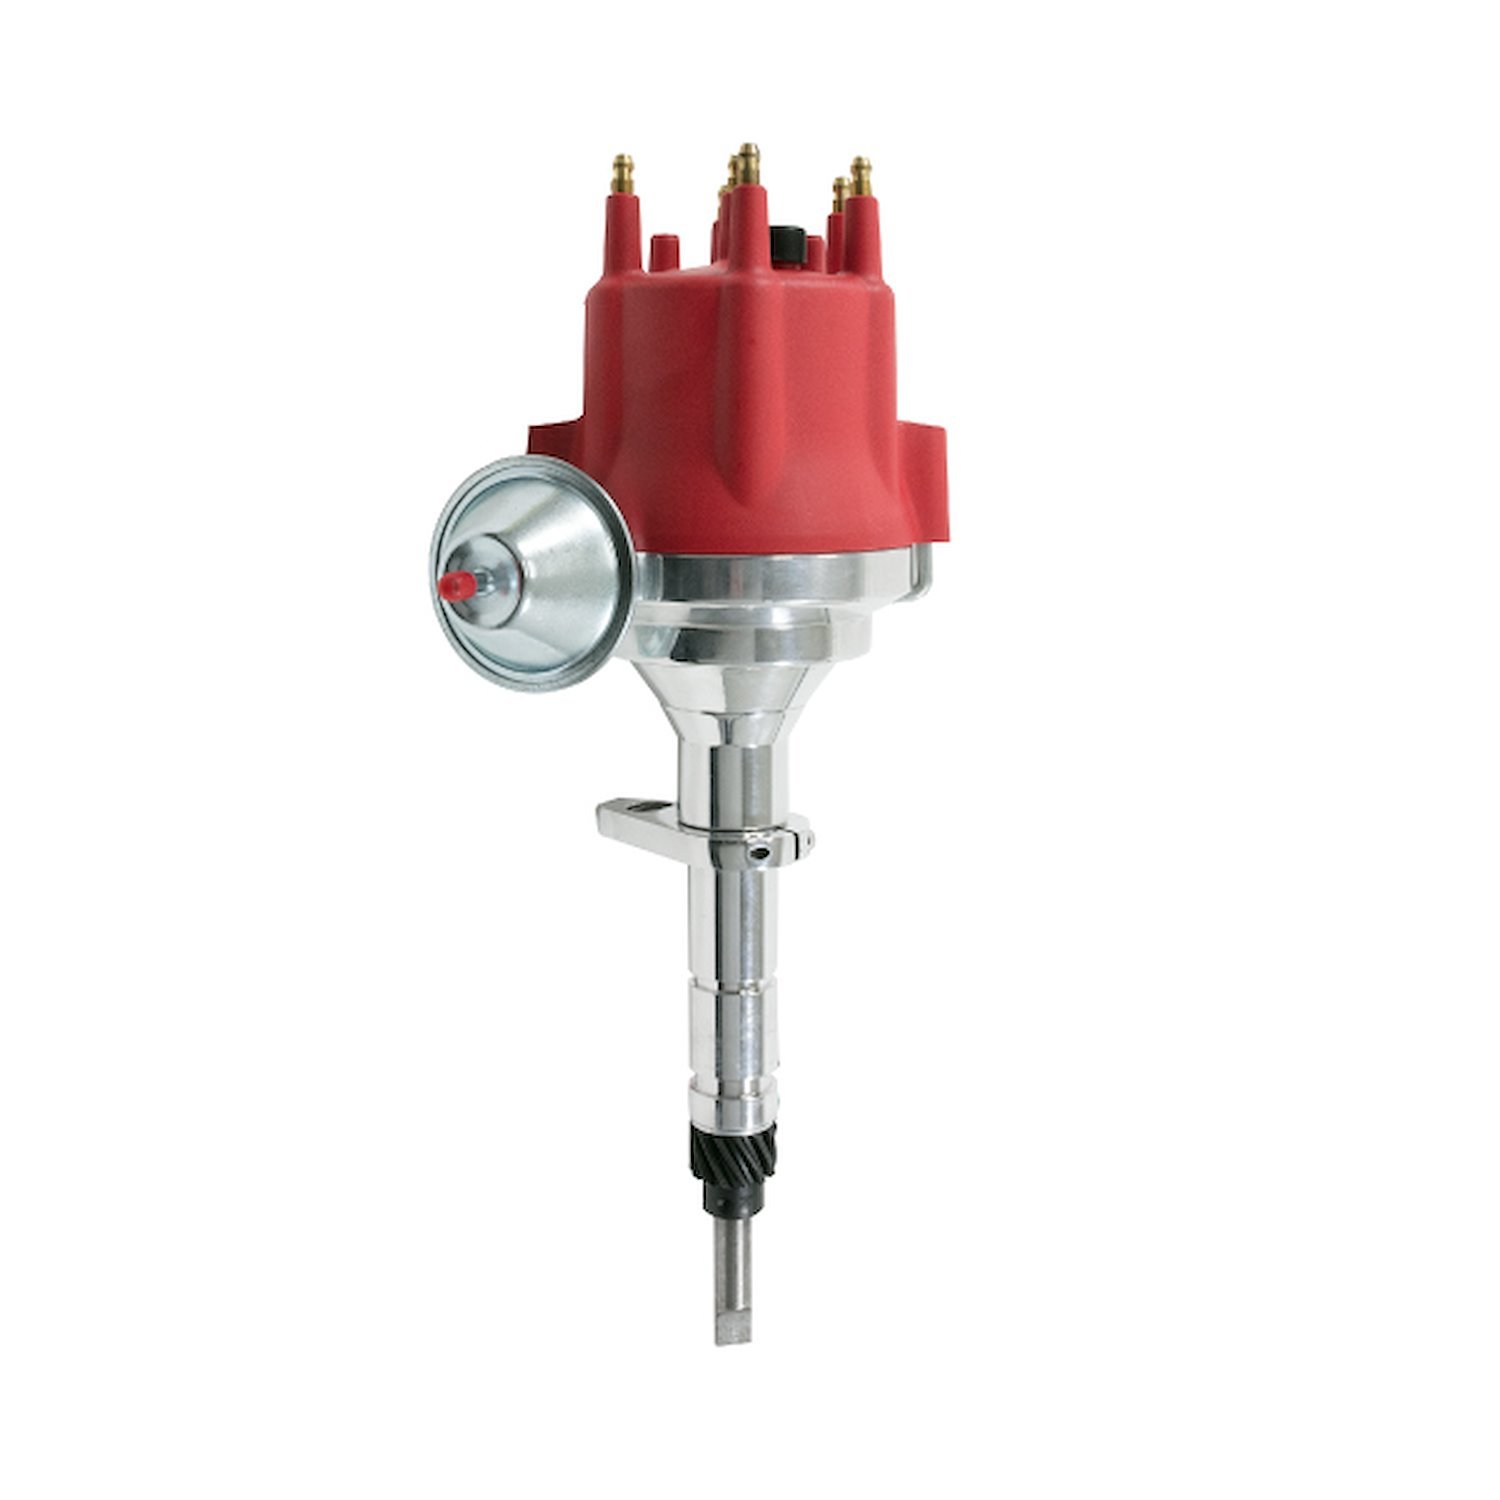 JM7716R Pro Series Ready-to-Run Distributor, Chevy L6 (Early Model), Red